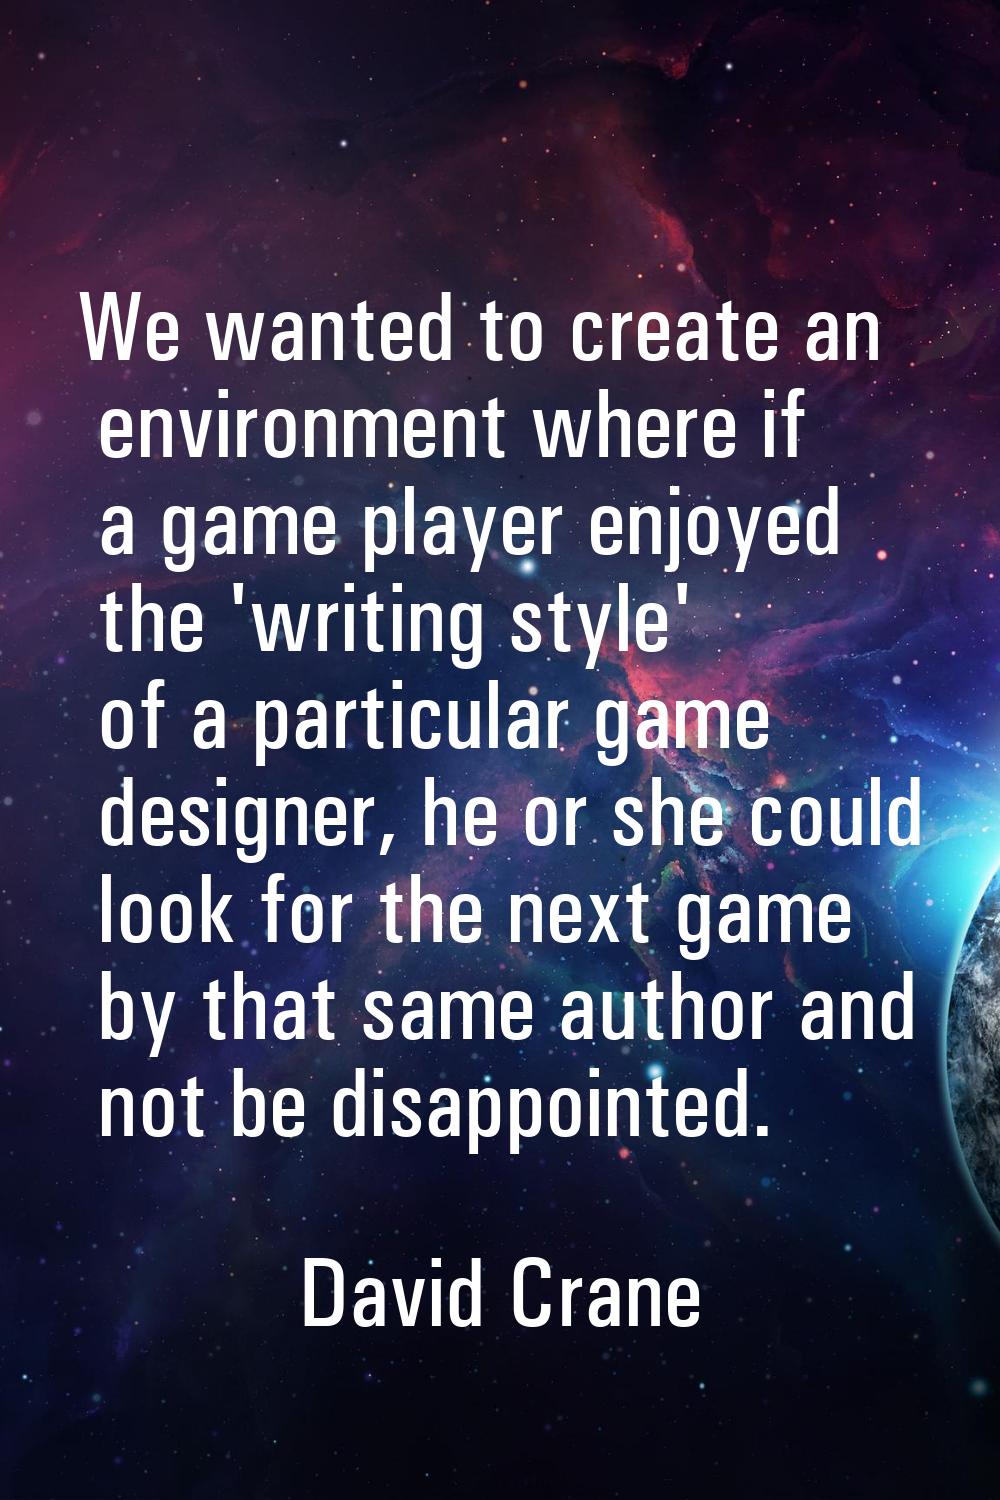 We wanted to create an environment where if a game player enjoyed the 'writing style' of a particul